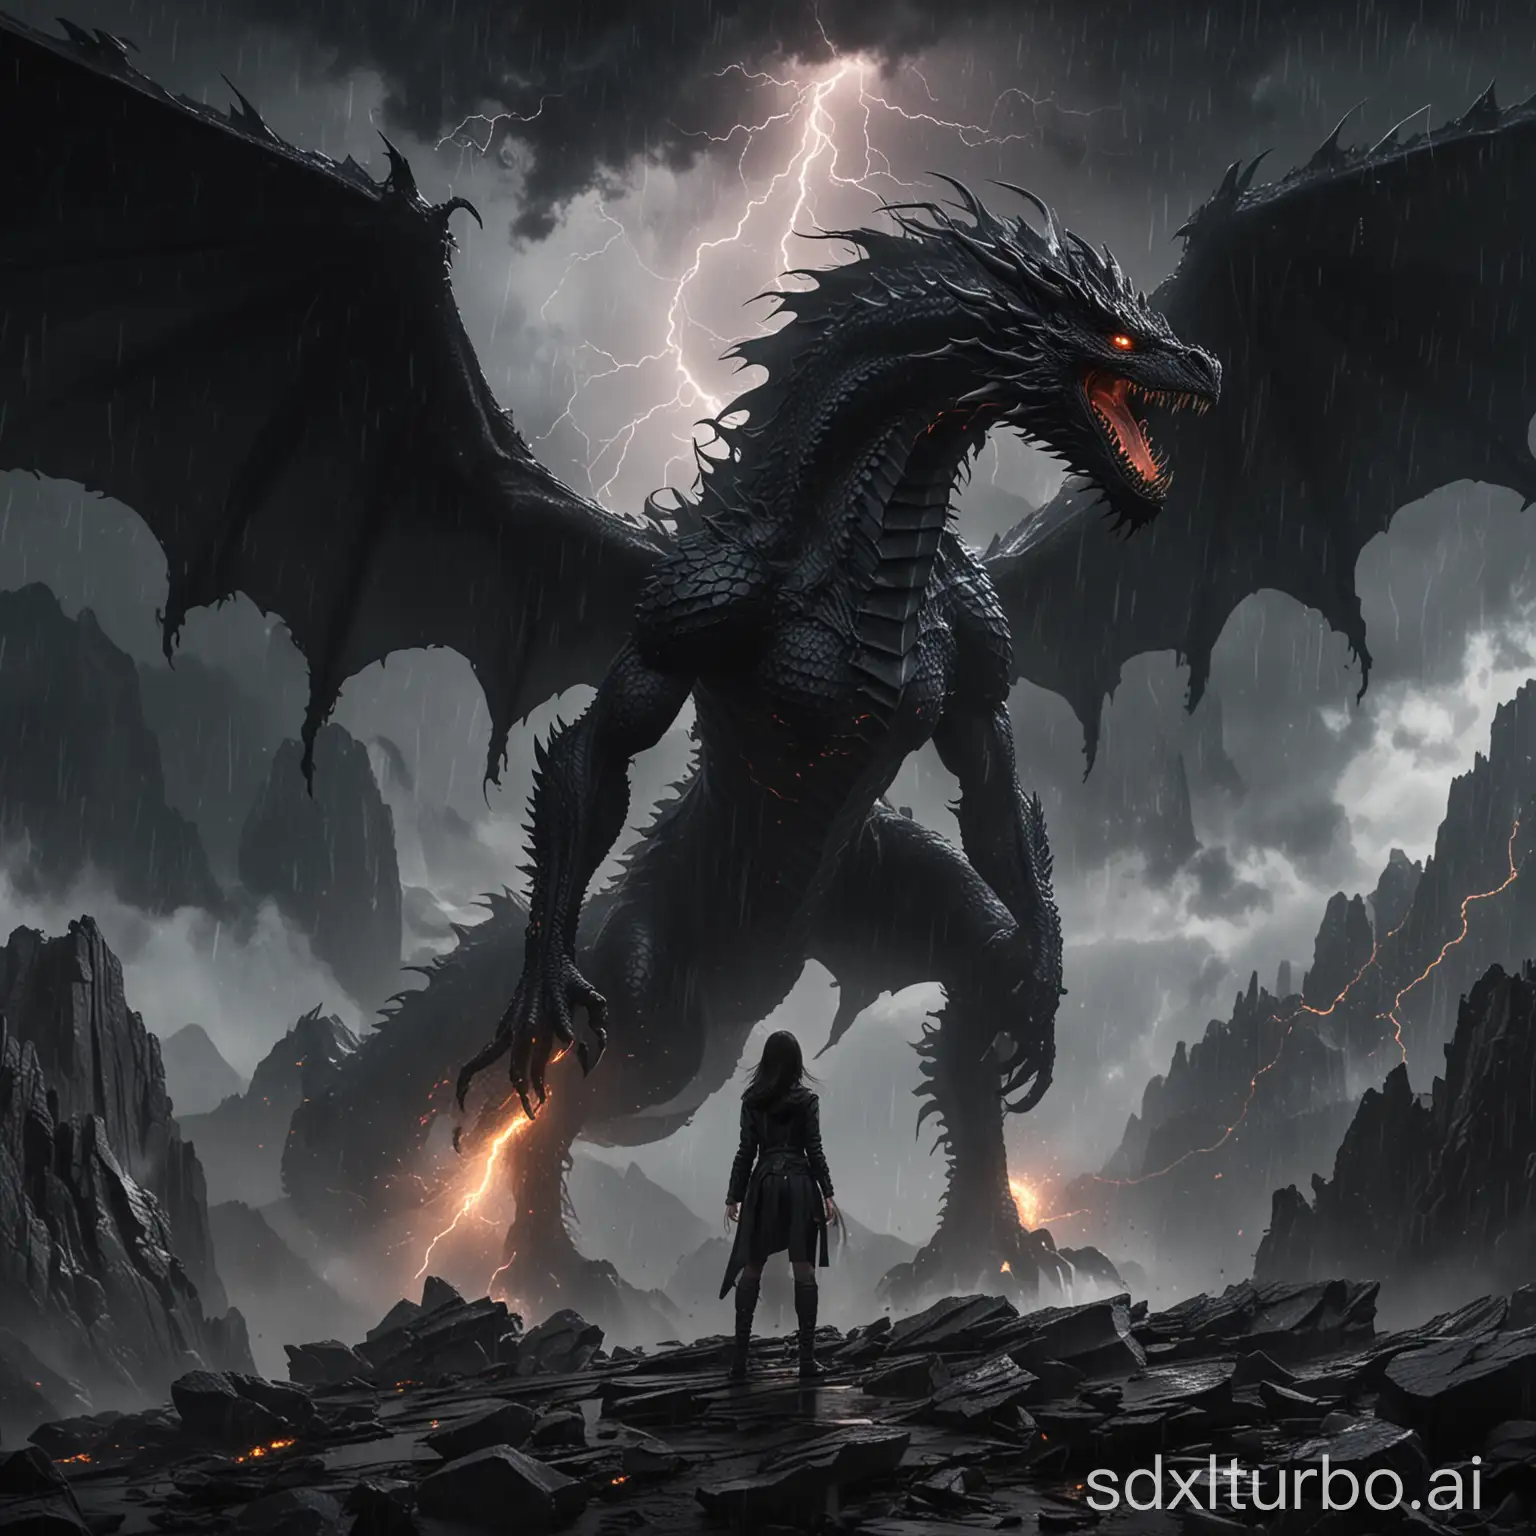 a giant black Dragon is standing in the background in a storm before a mountain. In the foreground, a young woman, more confident than ever in a tight-fitting dark outfit. Around her, electric energy crackles.